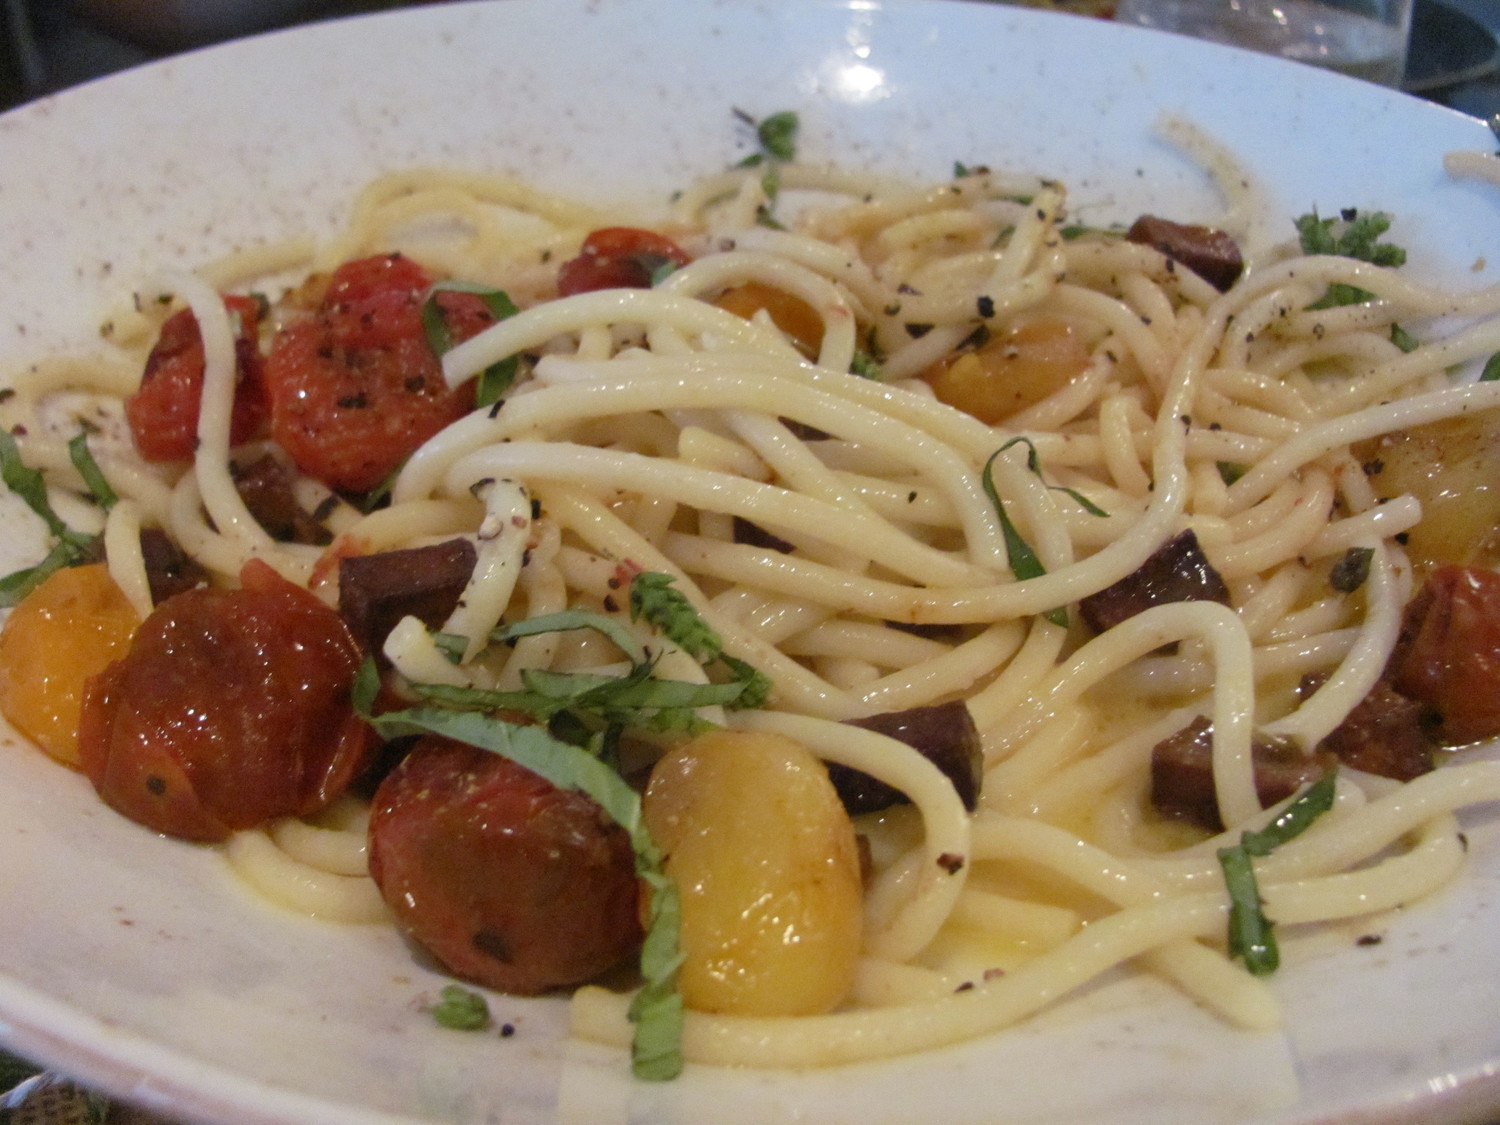 Carbonara with bucatini, vegan egg sauce, herbs, “bacon” and blistered tomatoes